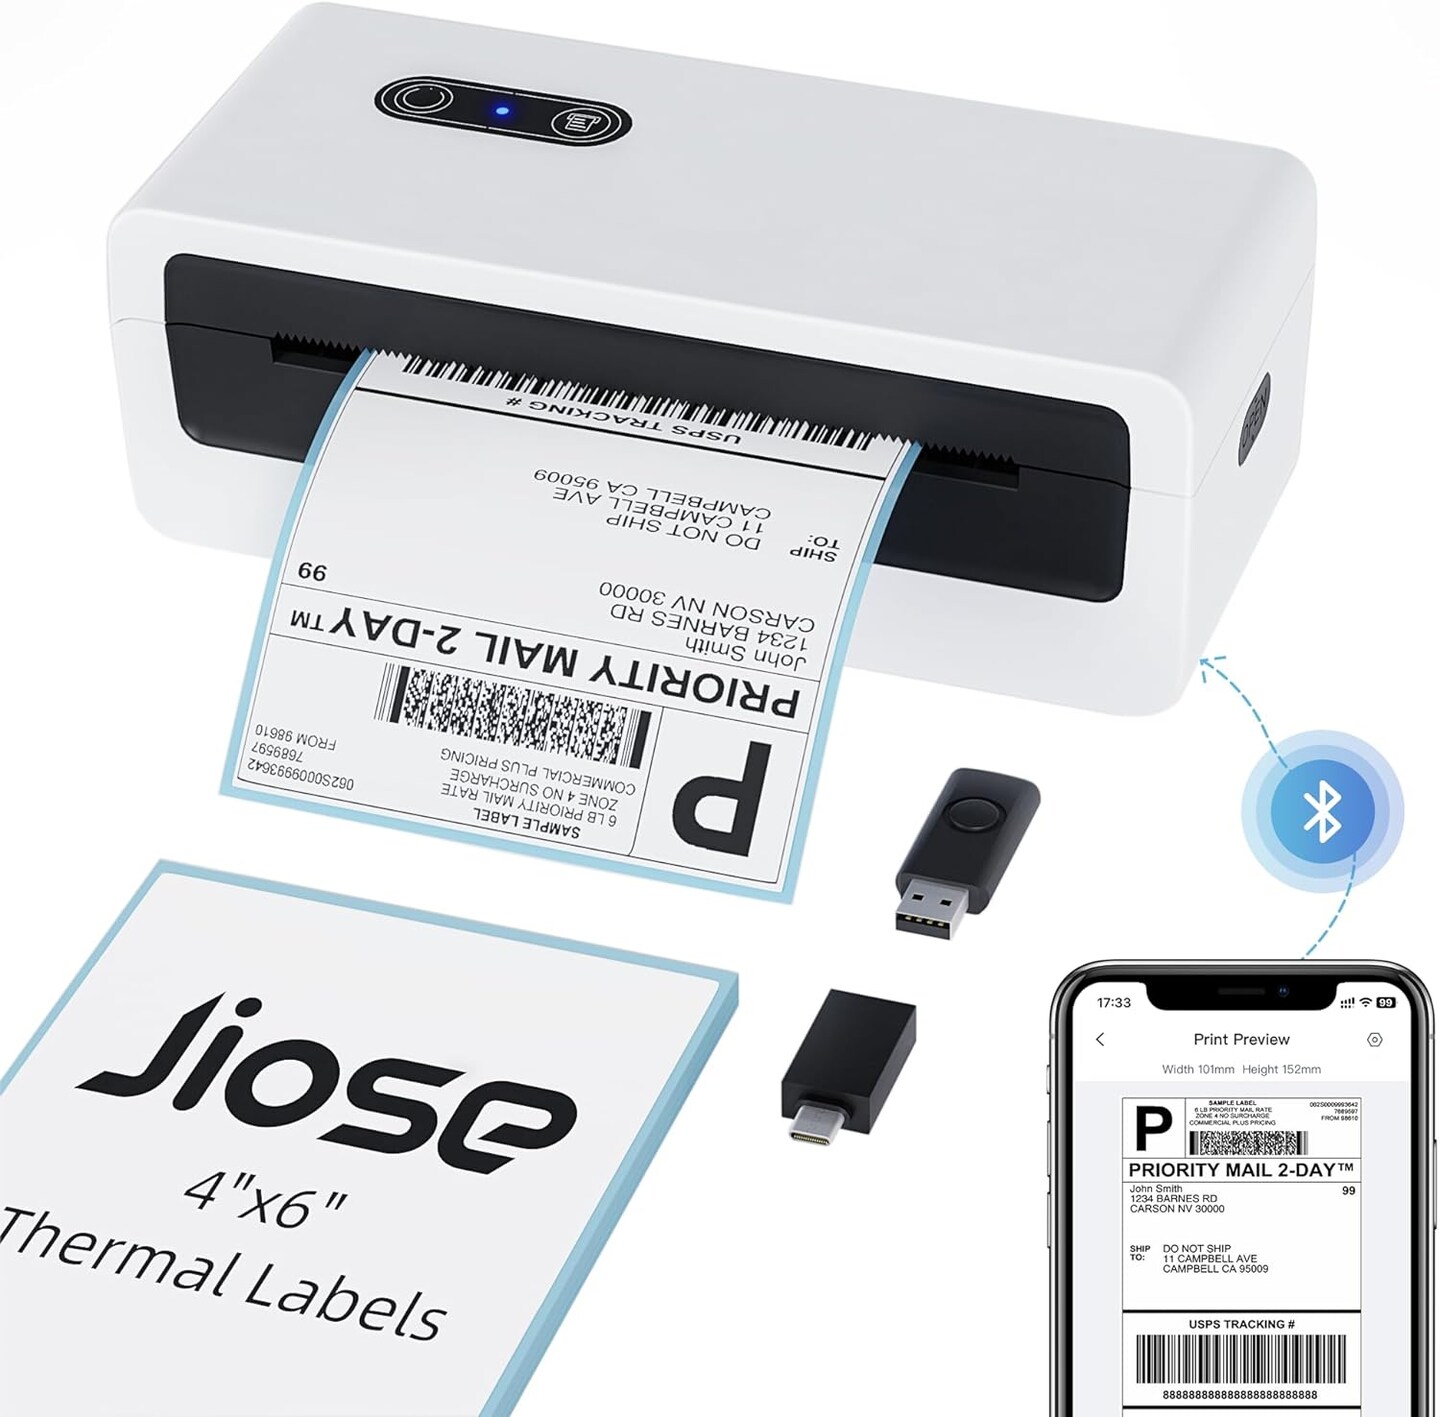 Jiose&#xAE;-Bluetooth Thermal Label Printer - Your Ultimate Solution for Streamlined Labeling Needs